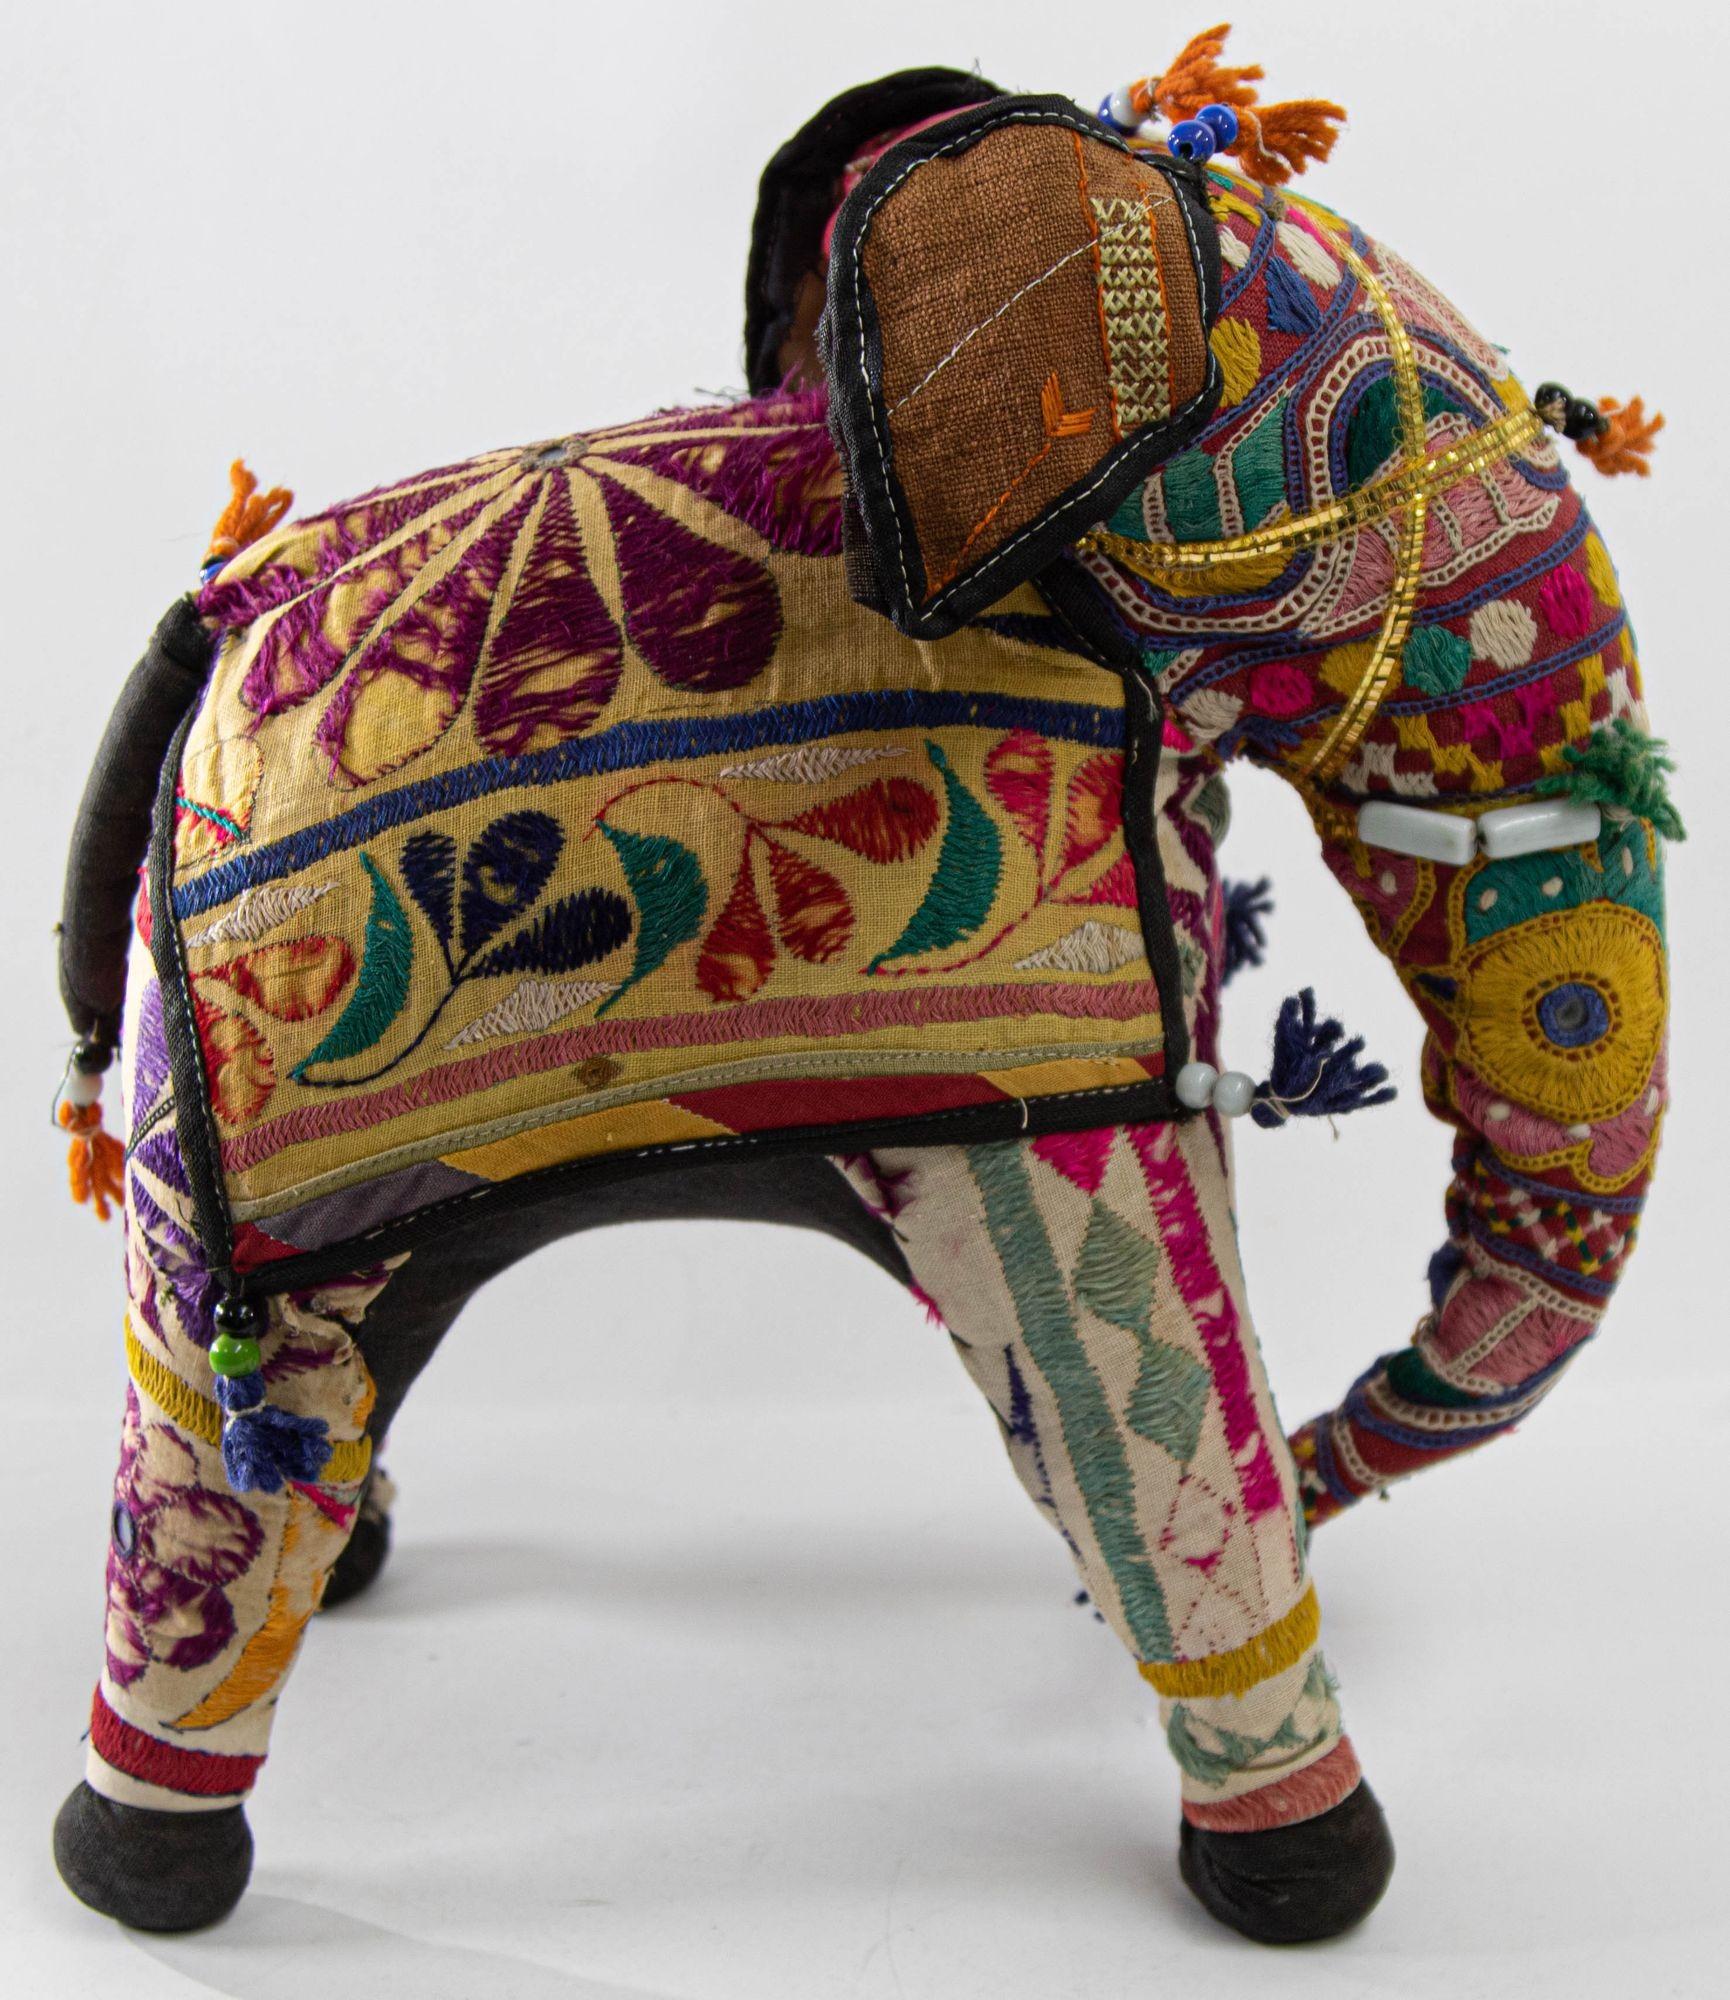 Vintage Handcrafted Stuffed Cotton Embroidered Ceremonial Elephant Toy Raj India en vente 8